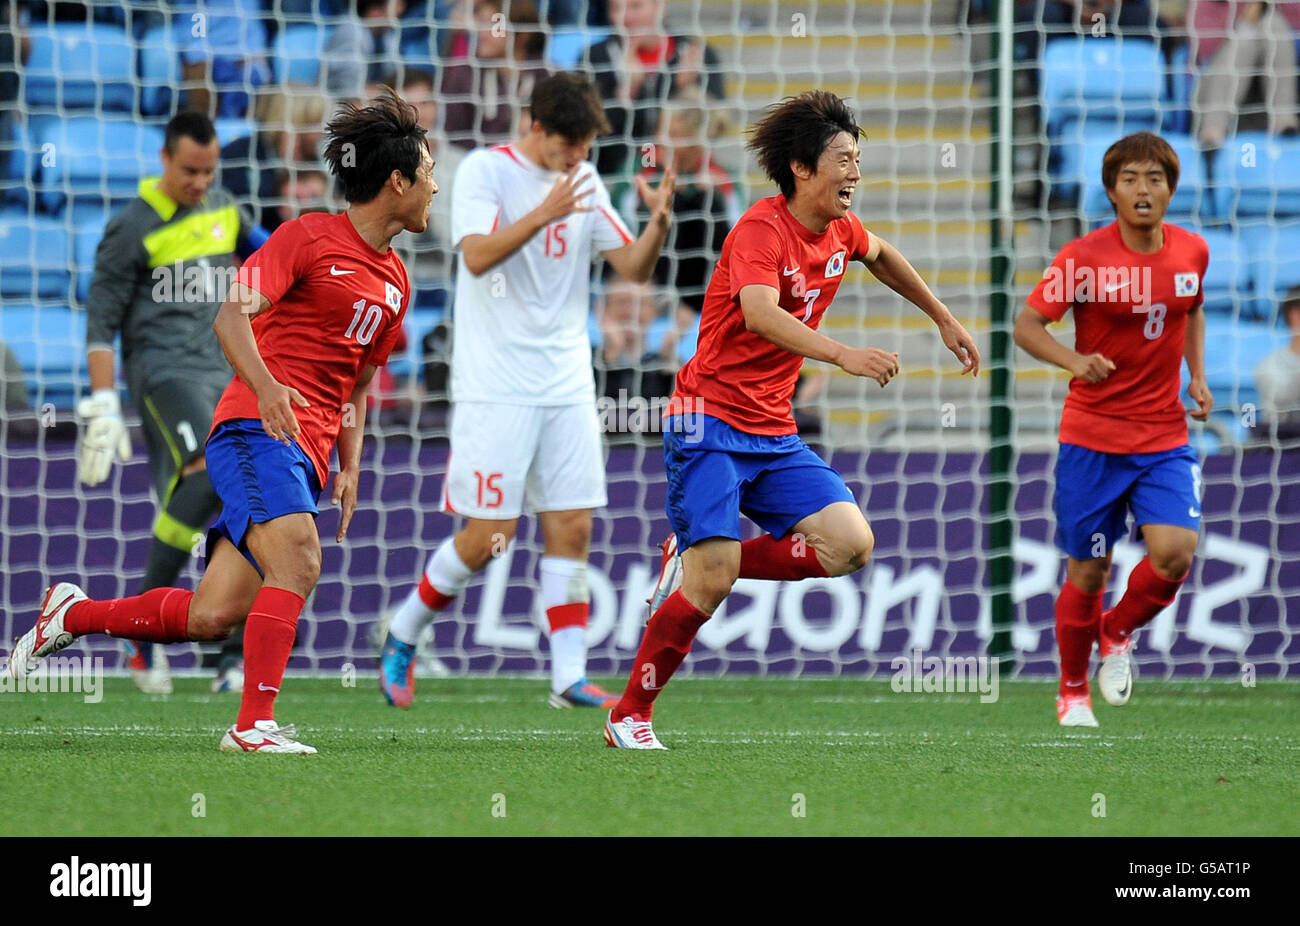 London Olympic Games - Day 2. South Korea's Bokyung Kim (centre) celebrates scoring during the Olympic Soccer match at the City of Coventry Stadium. Coventry. Stock Photo